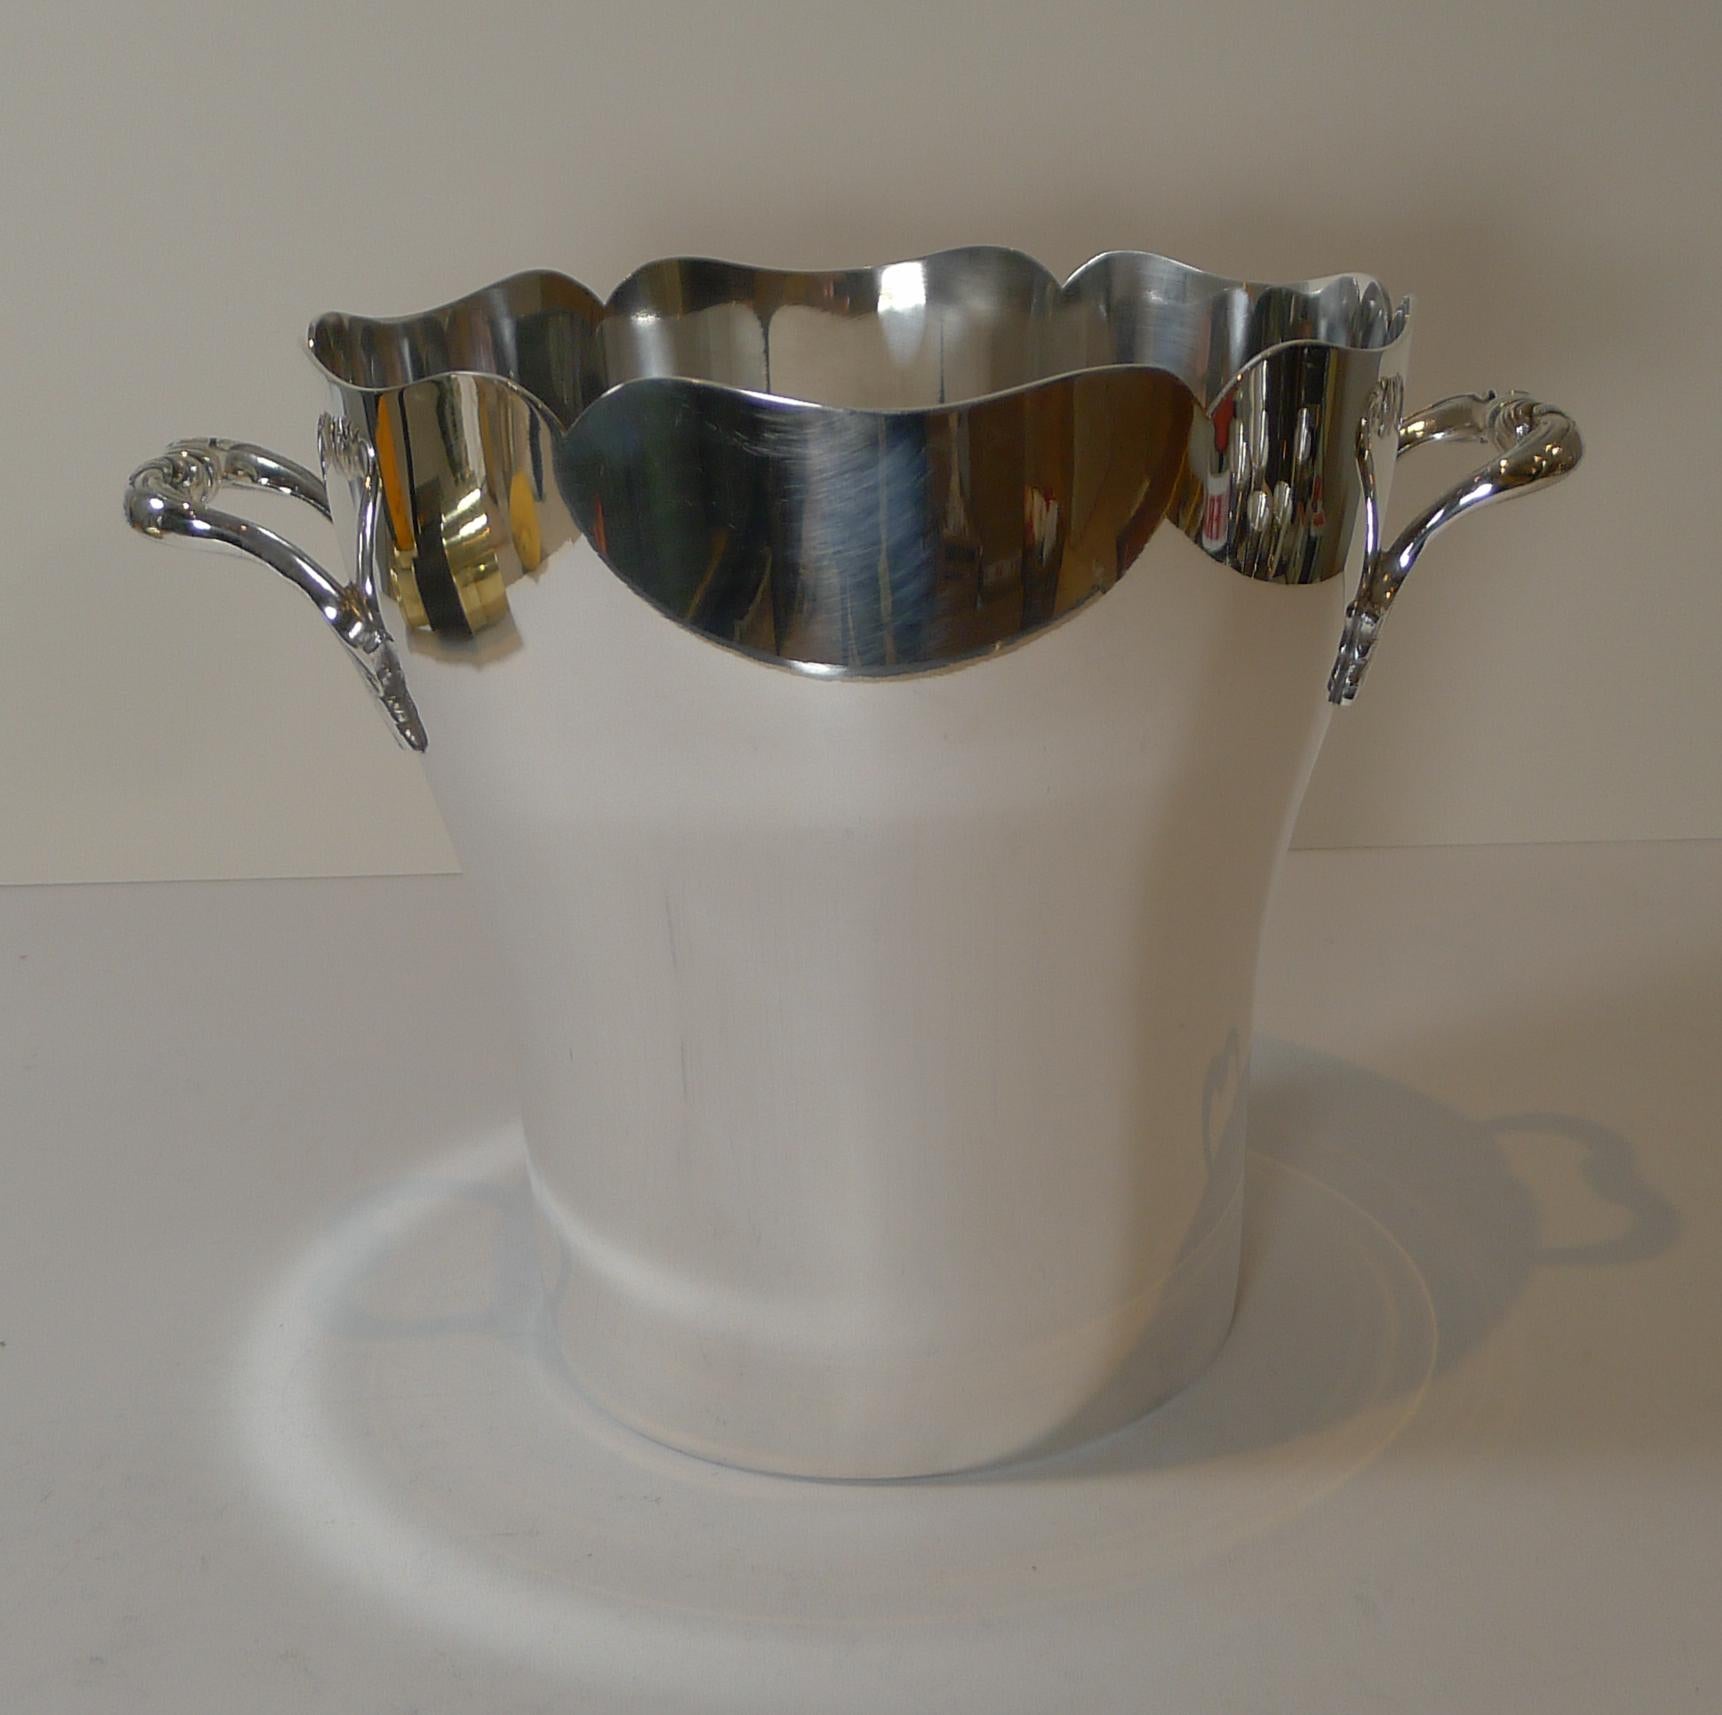 Early 20th Century Cailar & Bayard, Paris, Elegant French Champagne Bucket / Wine Cooler c.1920 For Sale